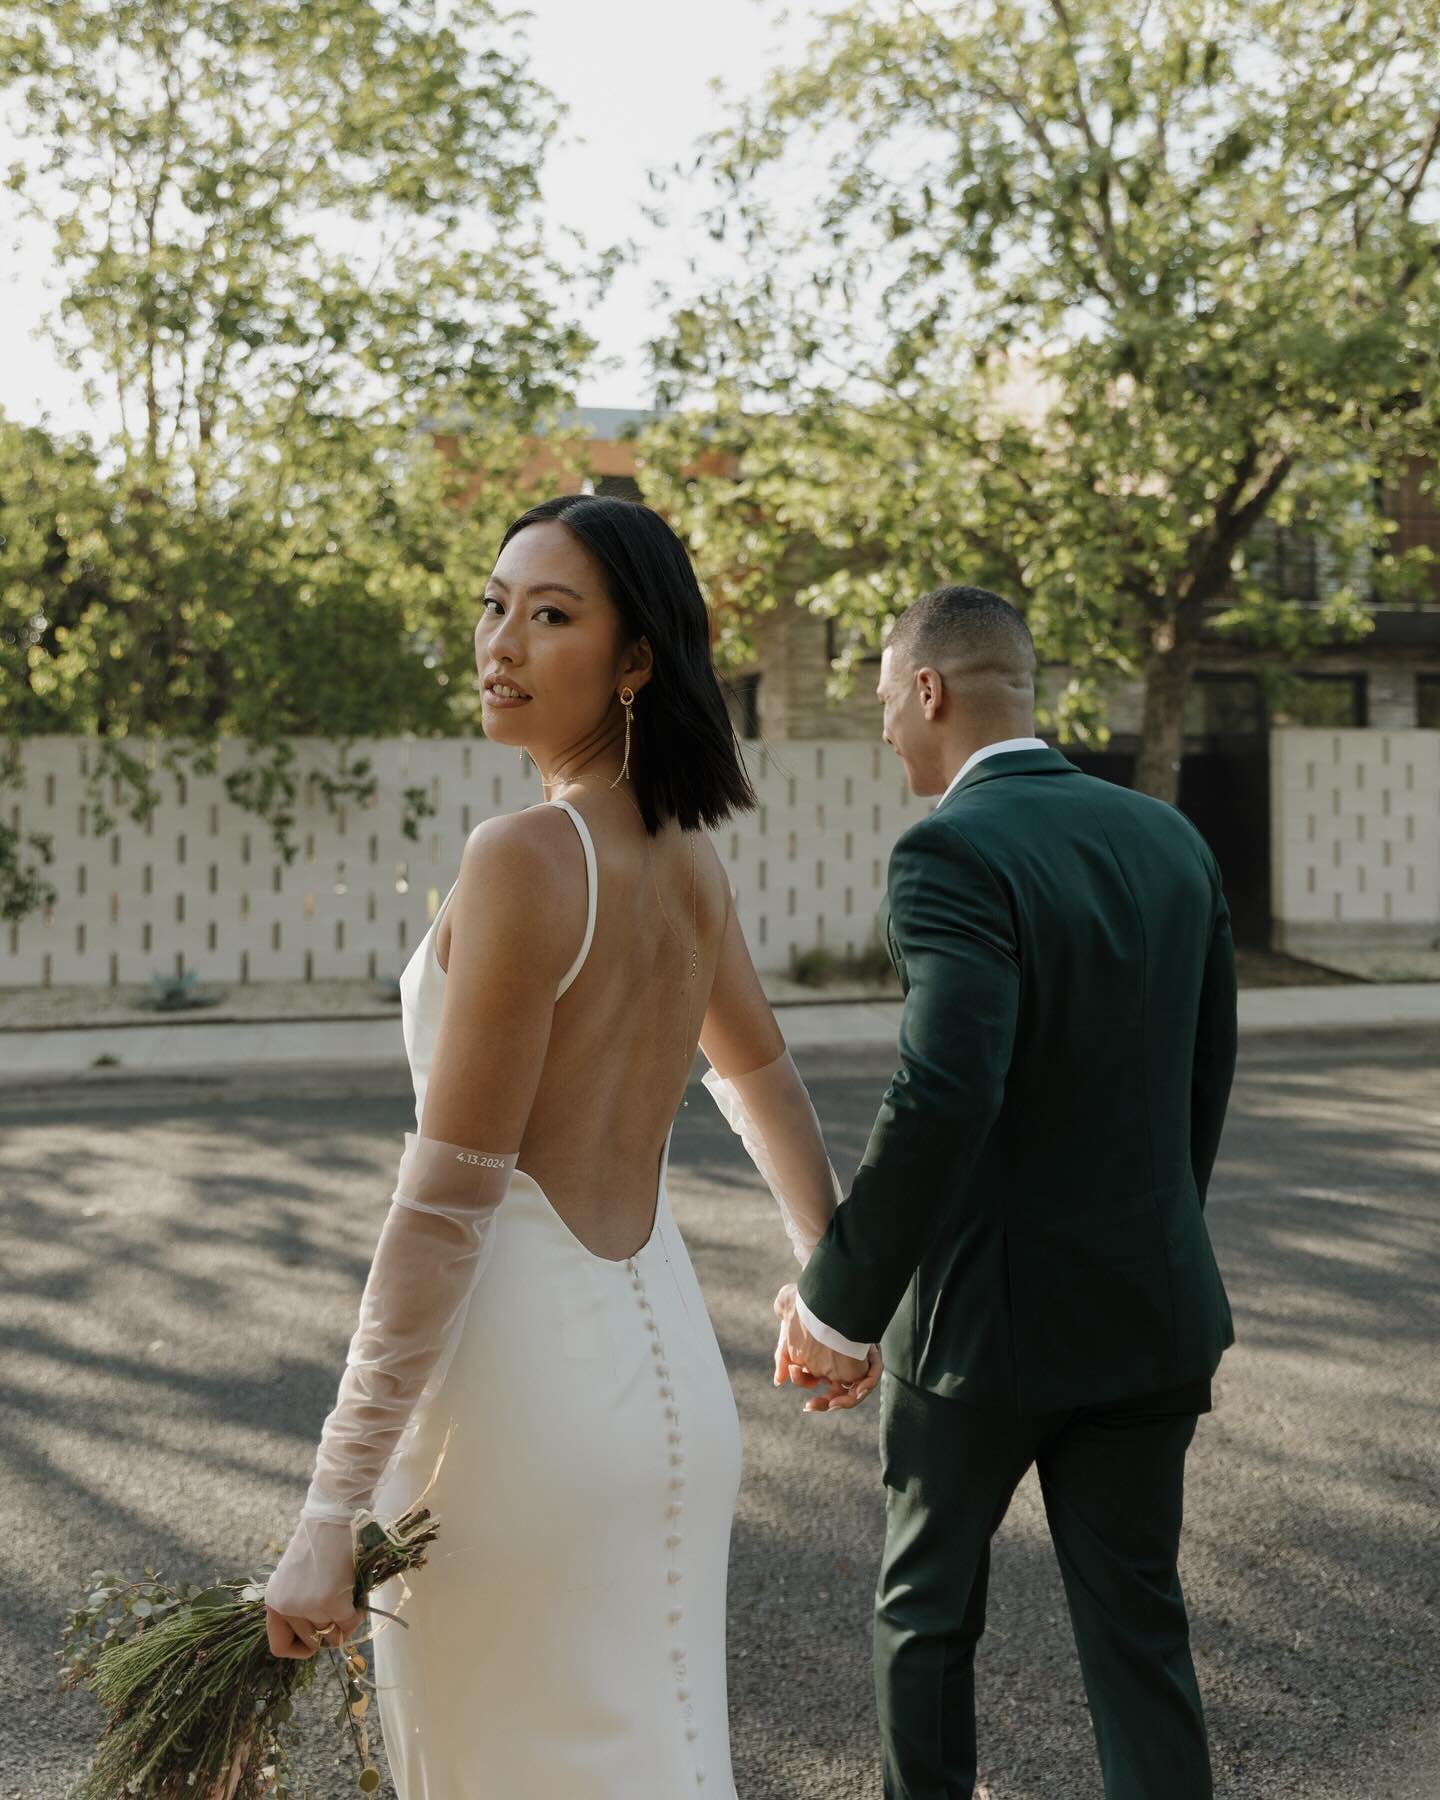 Officiated, hosted AND photographed my best friend&rsquo;s wedding last weekend. What a freaking BLAST it was. It is honestly one of my most favorite memories now. 

Connie &amp; Kyle hosted an intimate wedding in my backyard with their closest famil